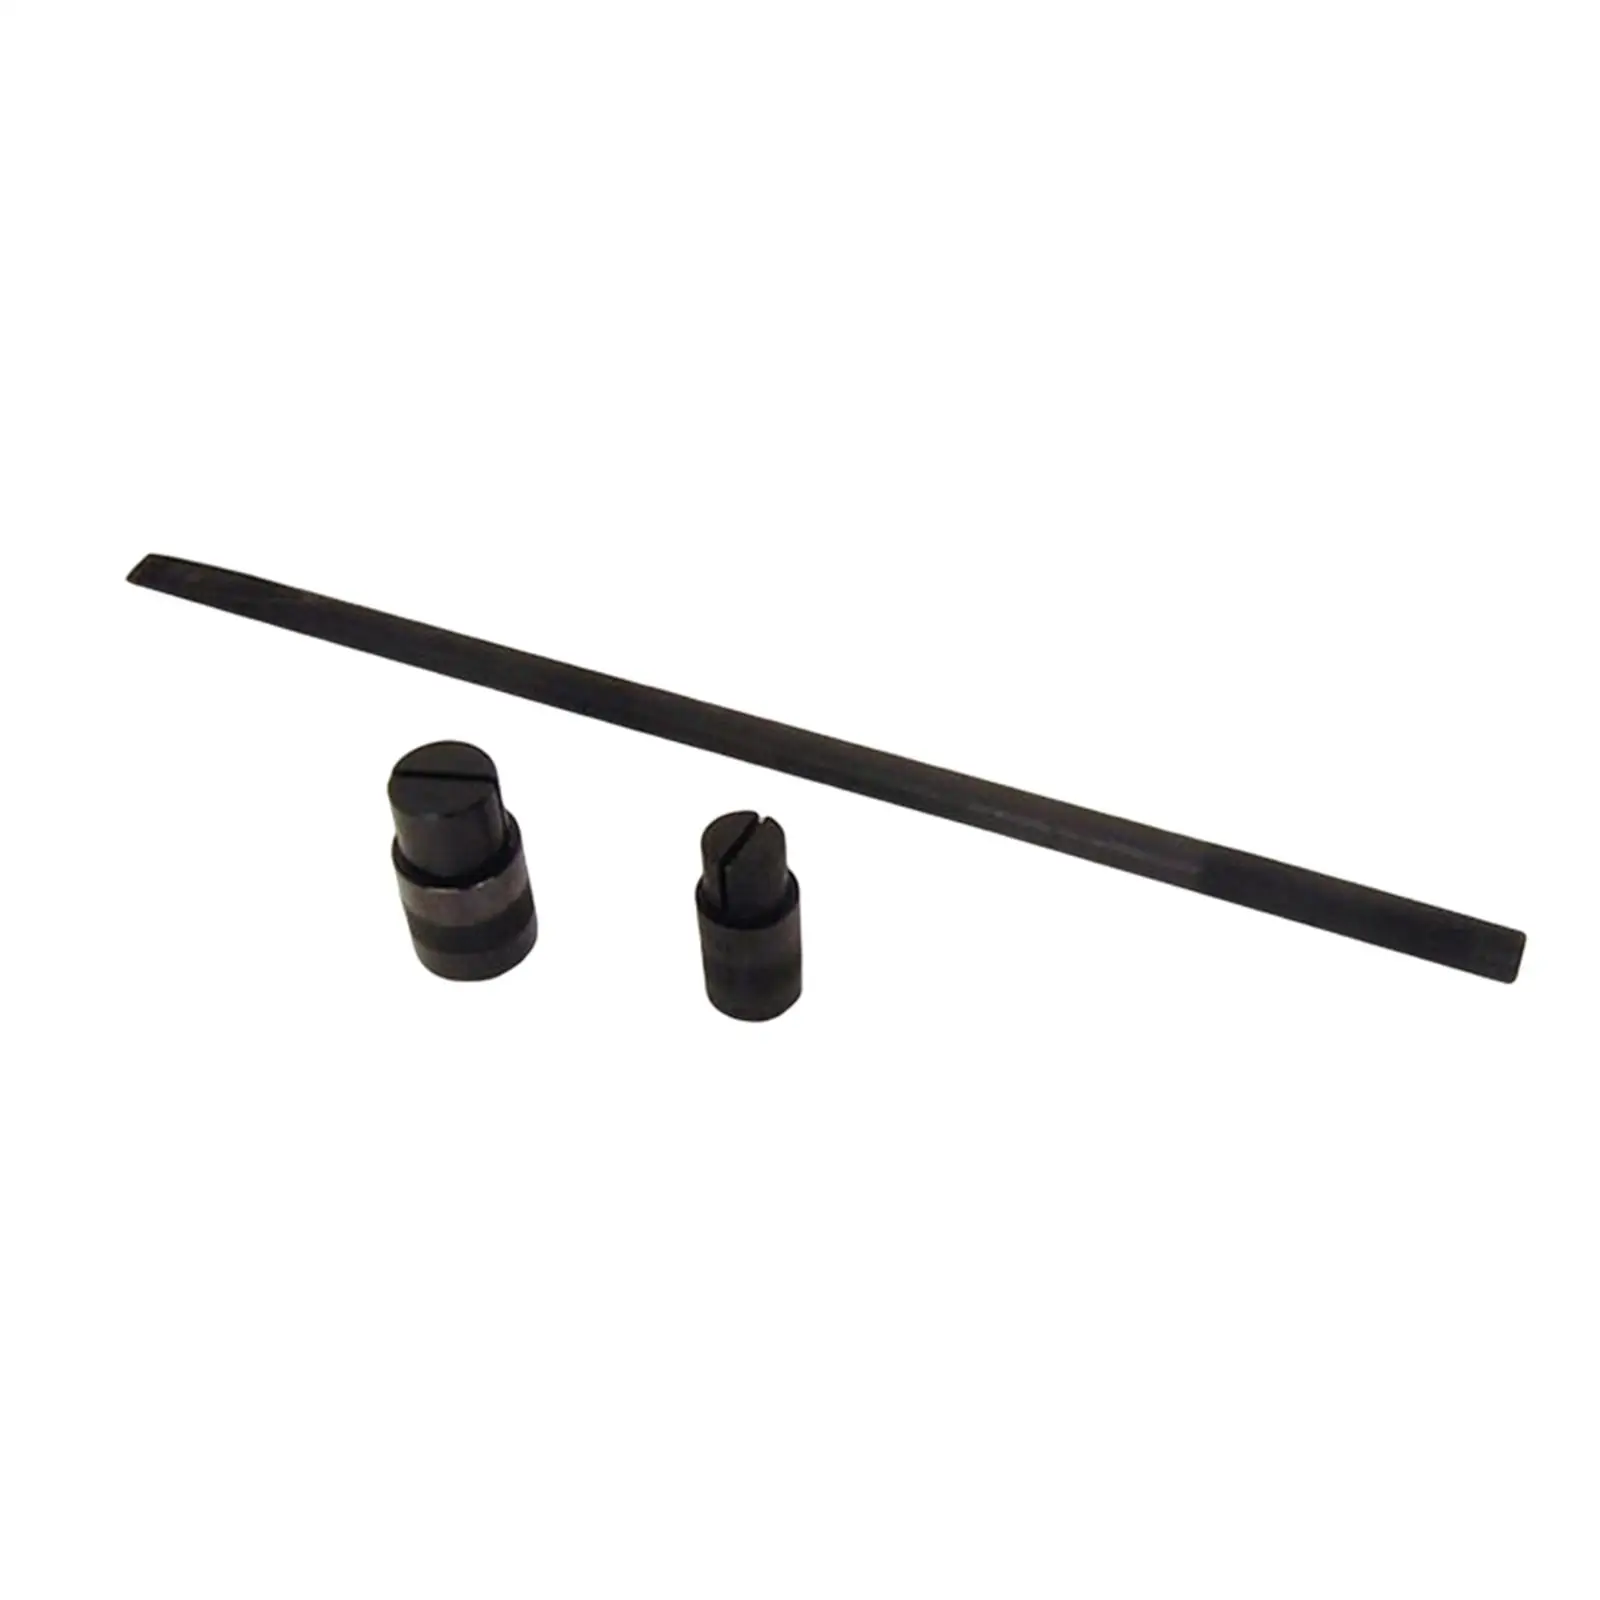 Set of 3 Wheel Bearing Remover Replacement Powersports Tool for Davidson